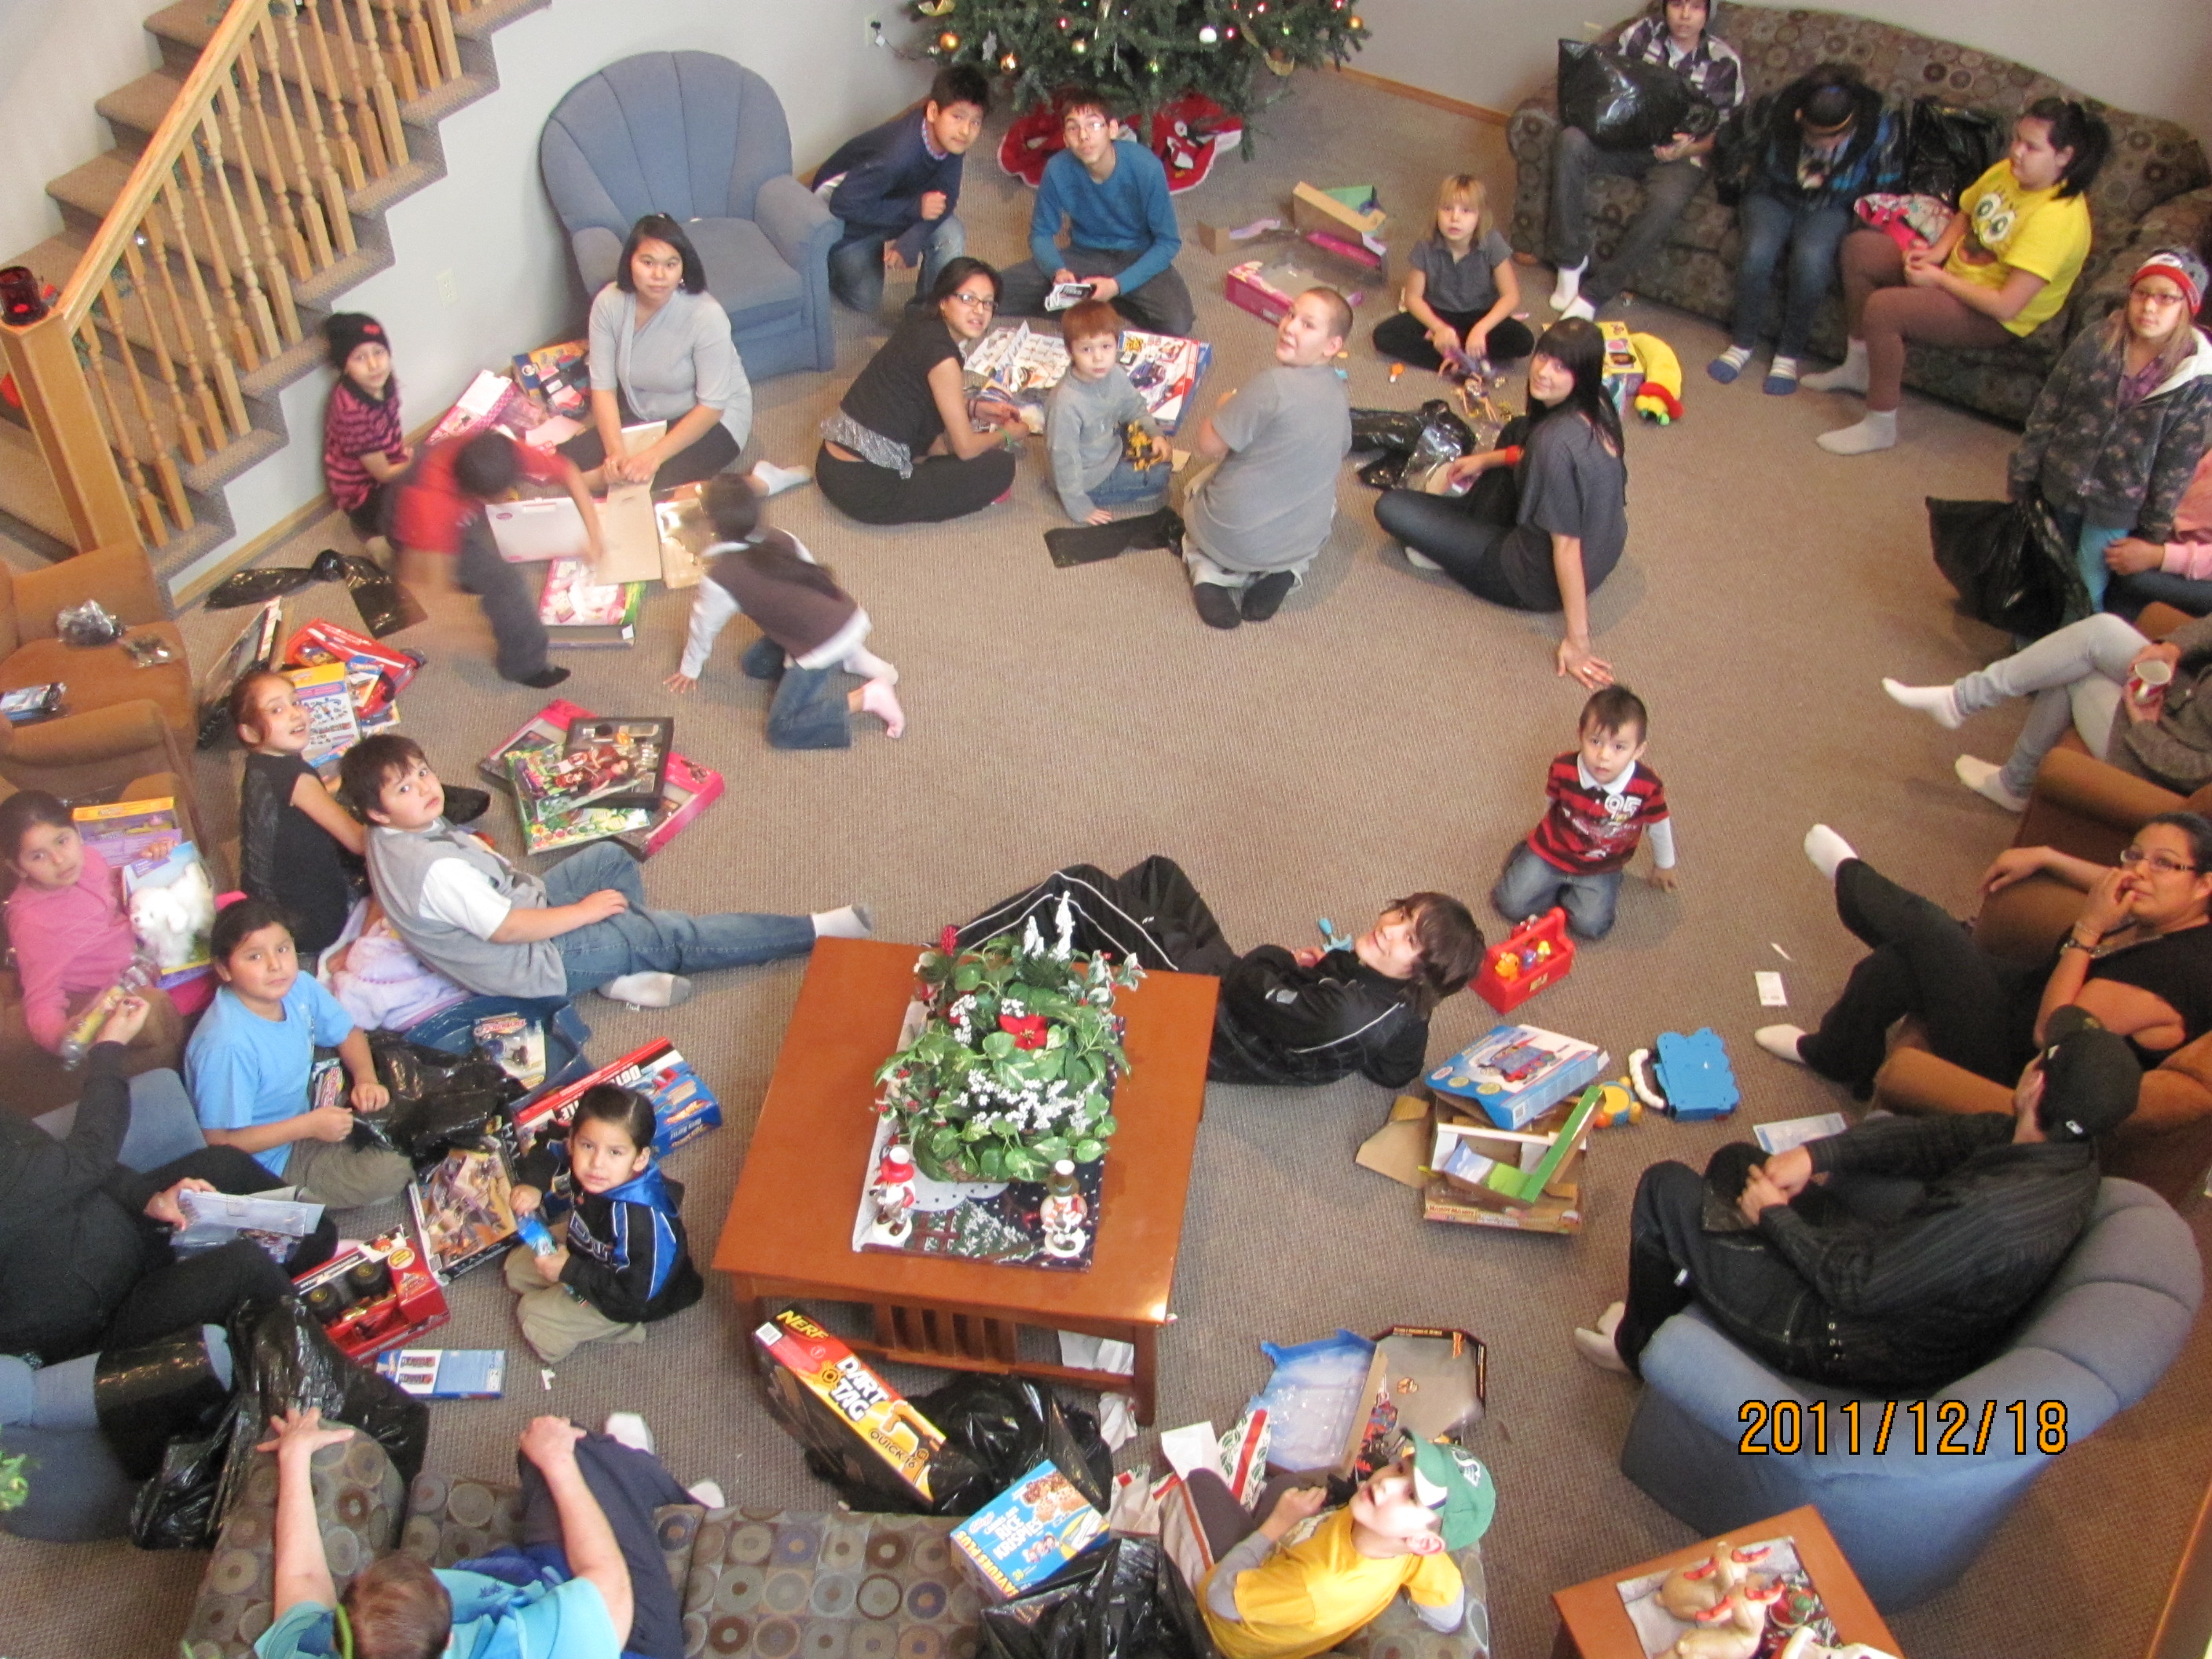 Community Christmas for north central Regina youth